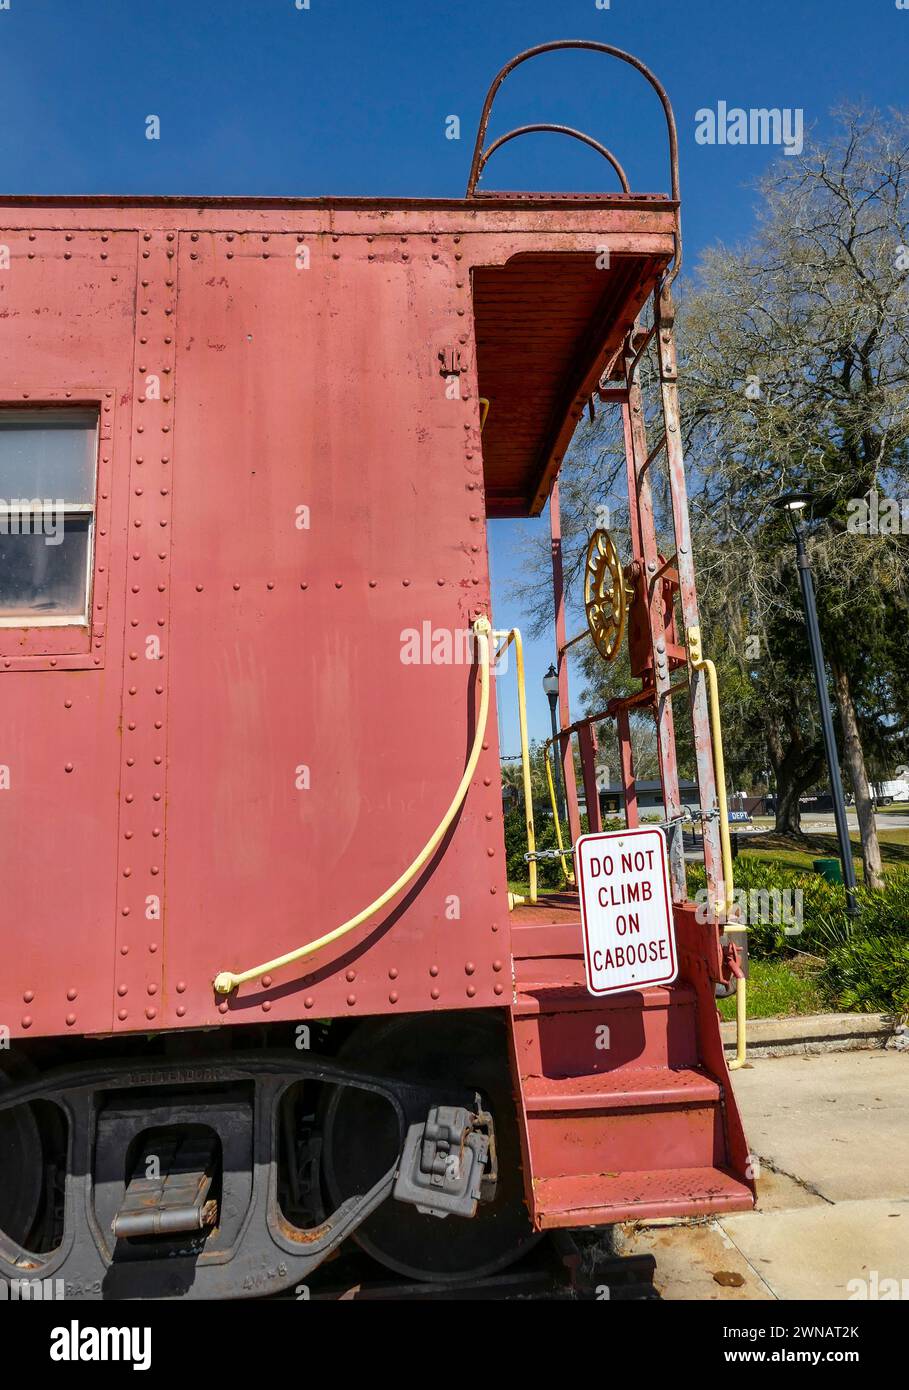 Railroad caboose resides in James Paul Park in High Springs, Florida. Stock Photo